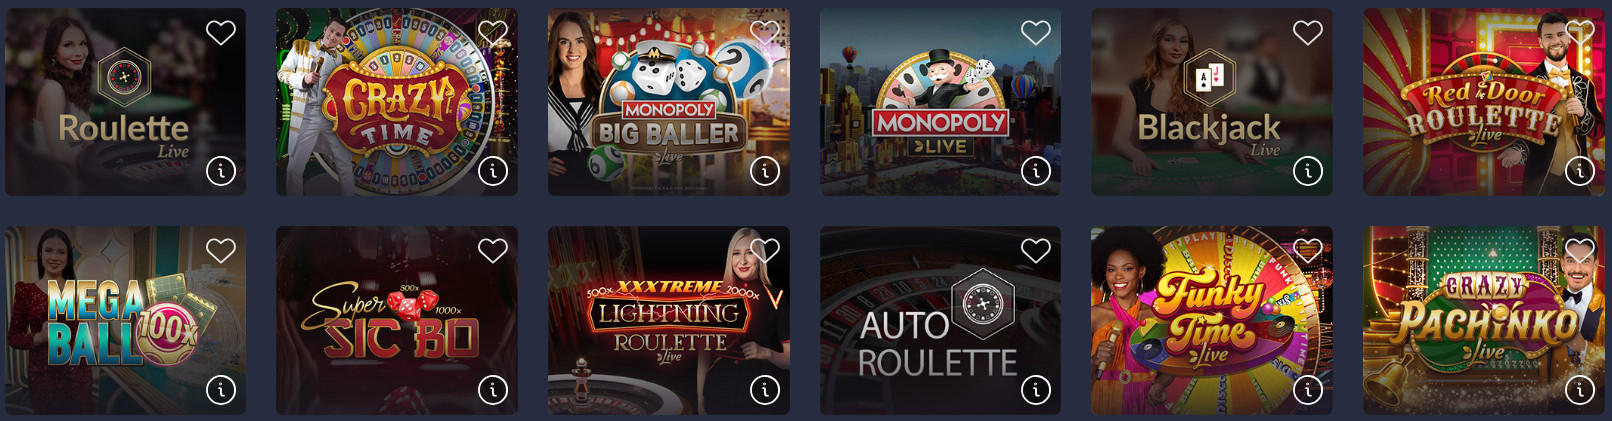 Live Dealer Section at Lottoland Casino